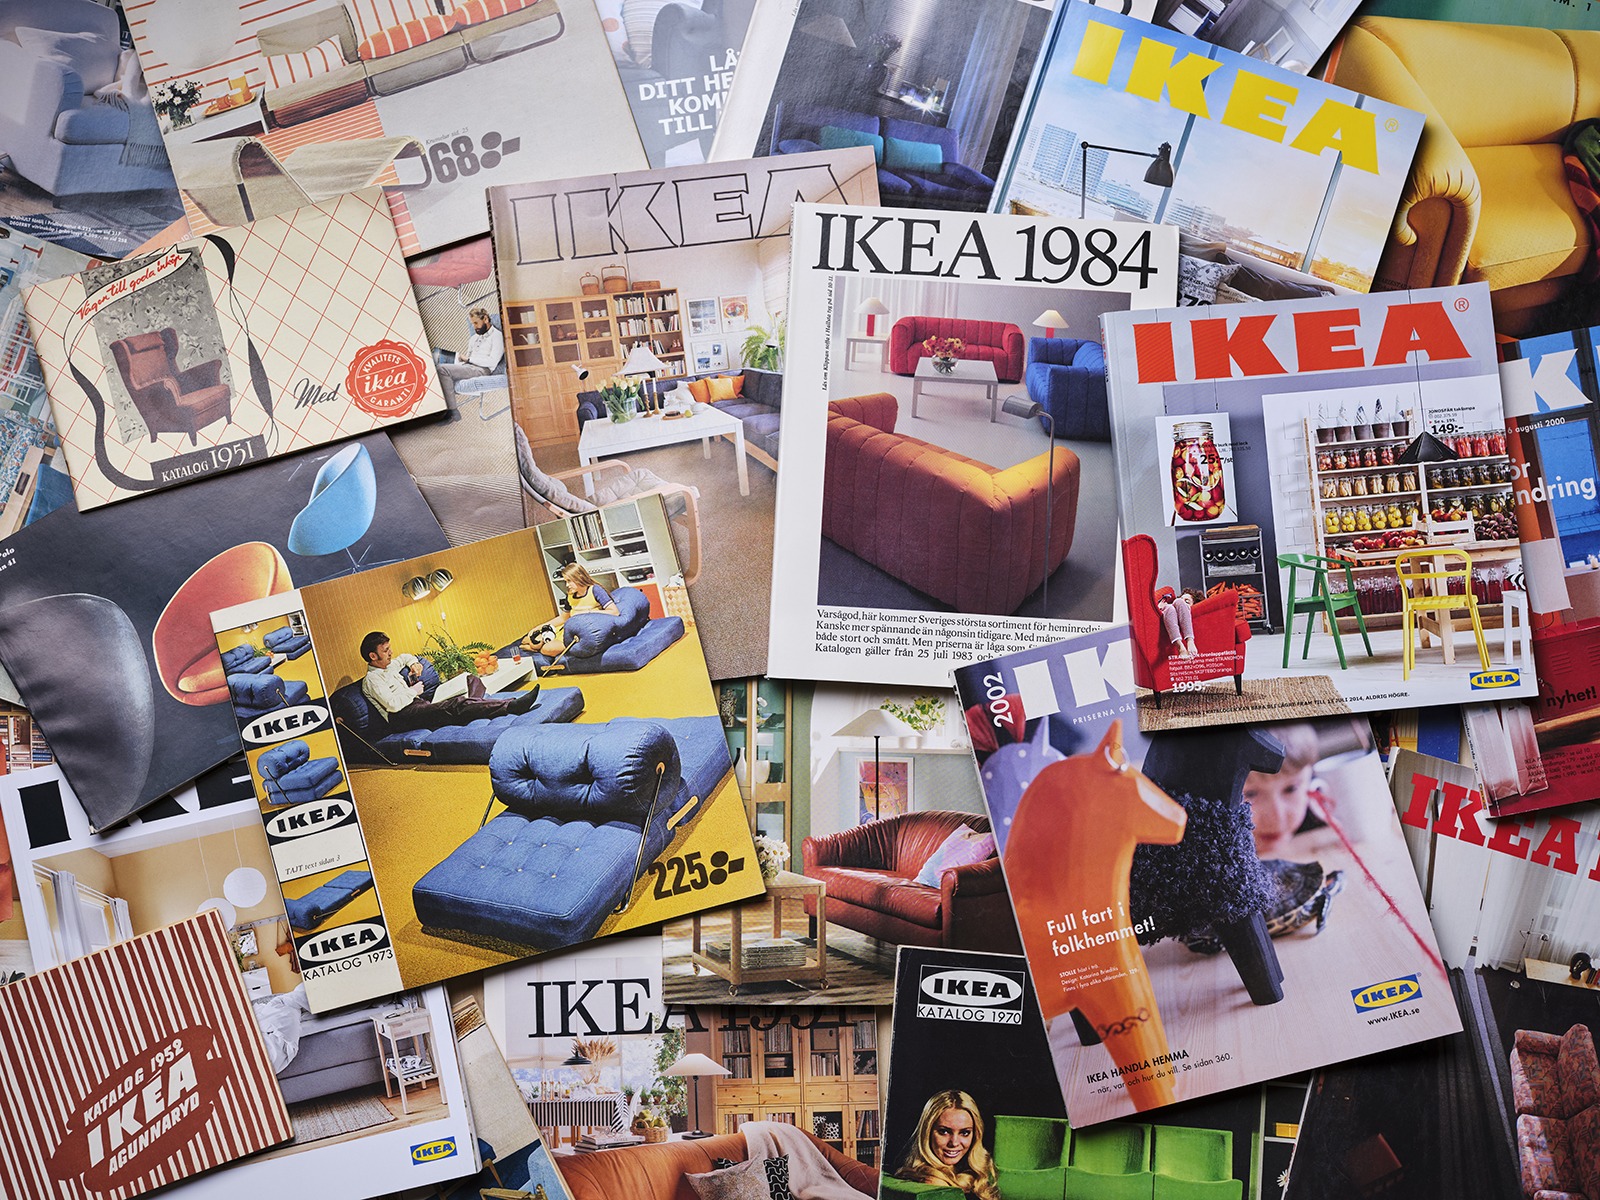 Several issues of the IKEA catalogue from 1951 until today covering a large surface, overlapping each other.